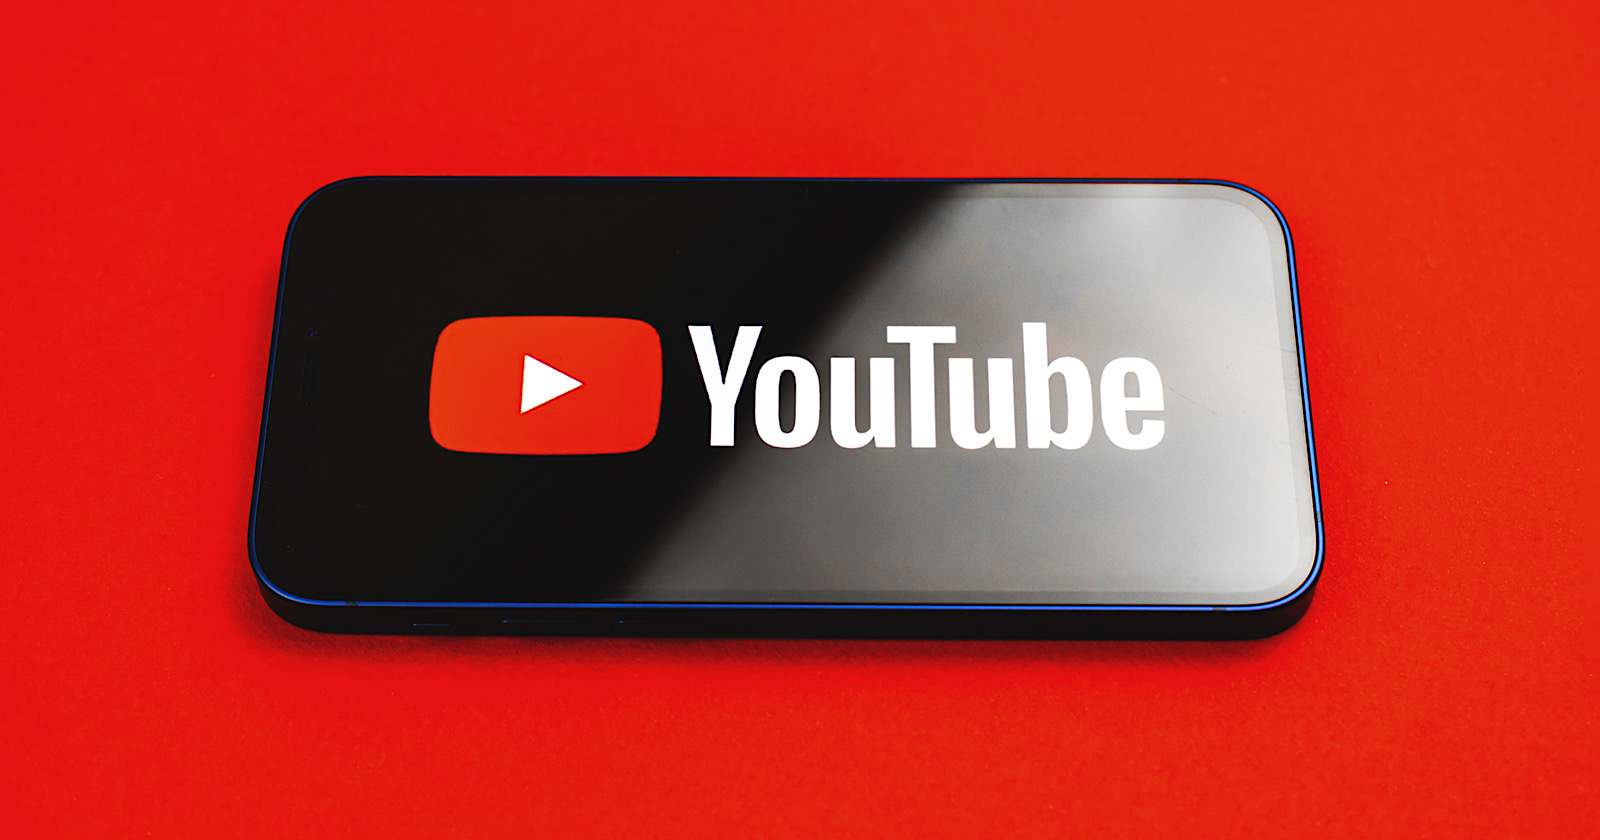 buy youtube subscribers from india, buy indian youtube video view, buy usa youtube views, buy youtube views australia, buy 1 million youtube views, buy youtube video view, buy youtube views india, buy youtube views from usa, buy youtube views, buy watchtime on youtube, Buy 1 Million youtube video views, Buyyoutubeviews, India, Indian, Australia, USA, Watchtime, Video, Video views, 1 million, subscribers, youtube video